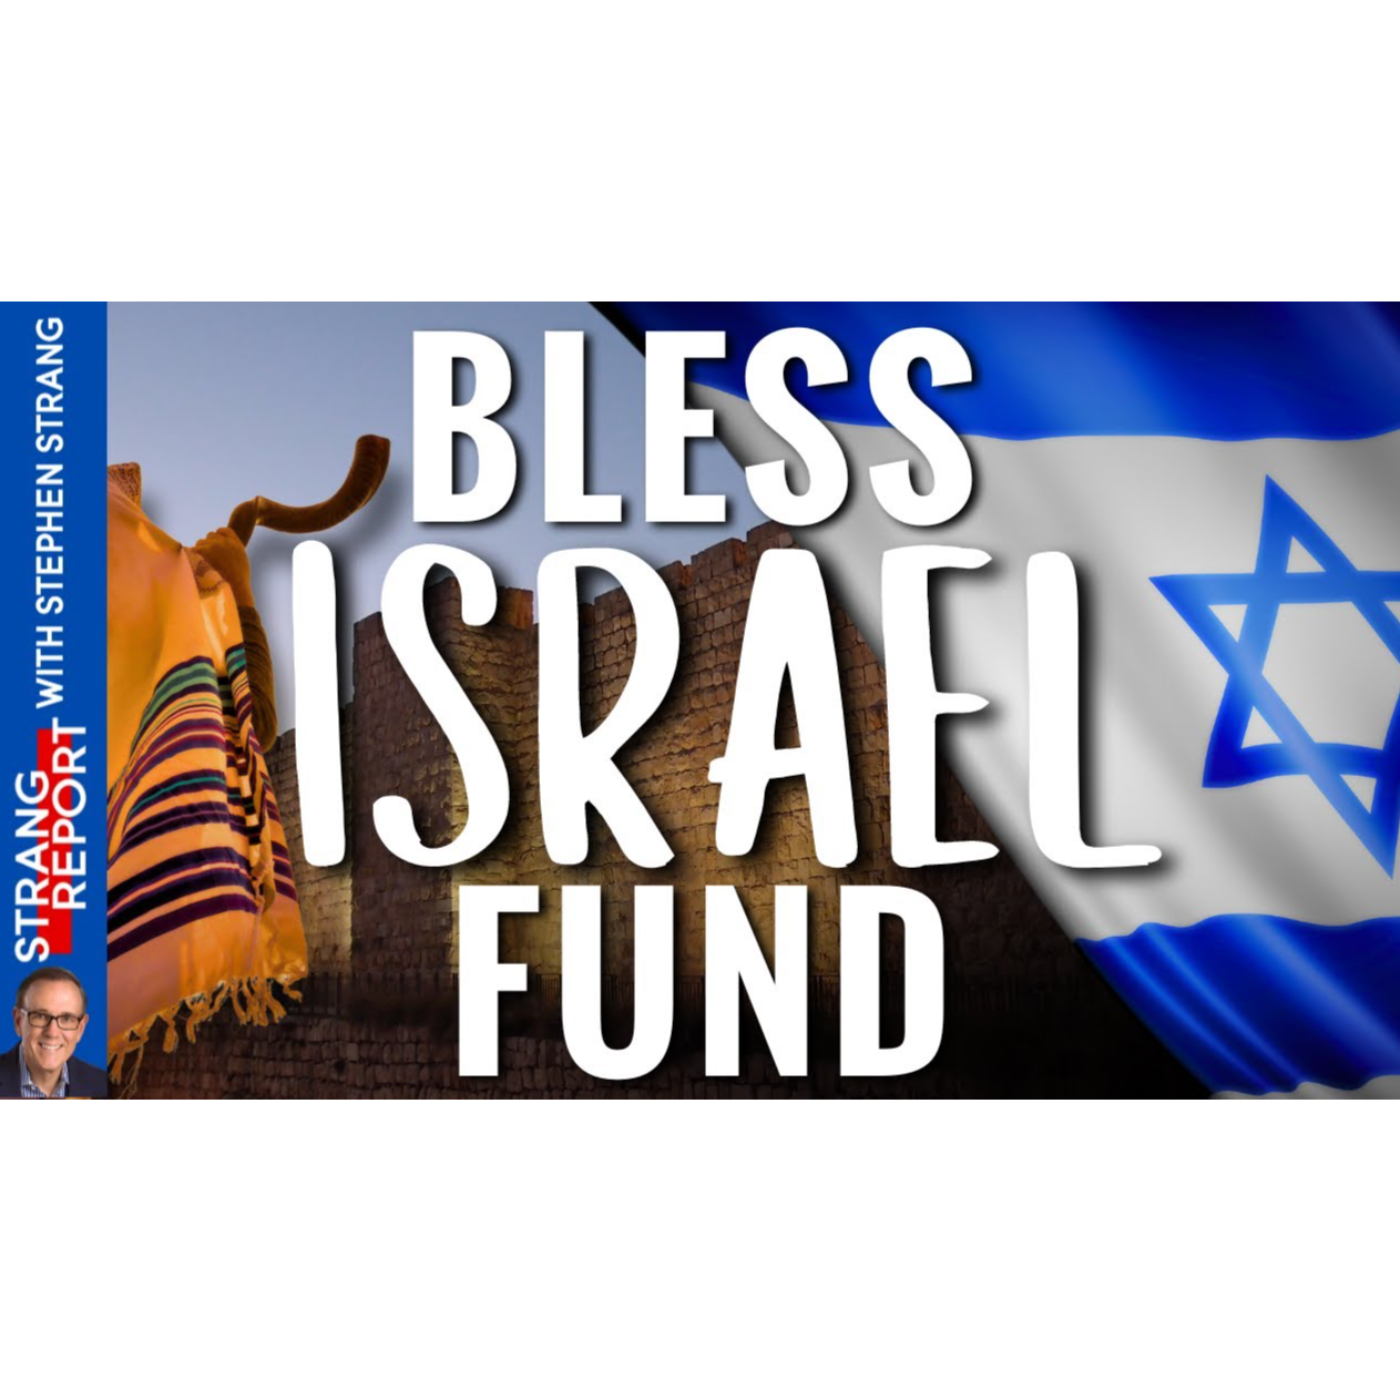 “Bless Israel” Fund Transforms Israel’s Future!